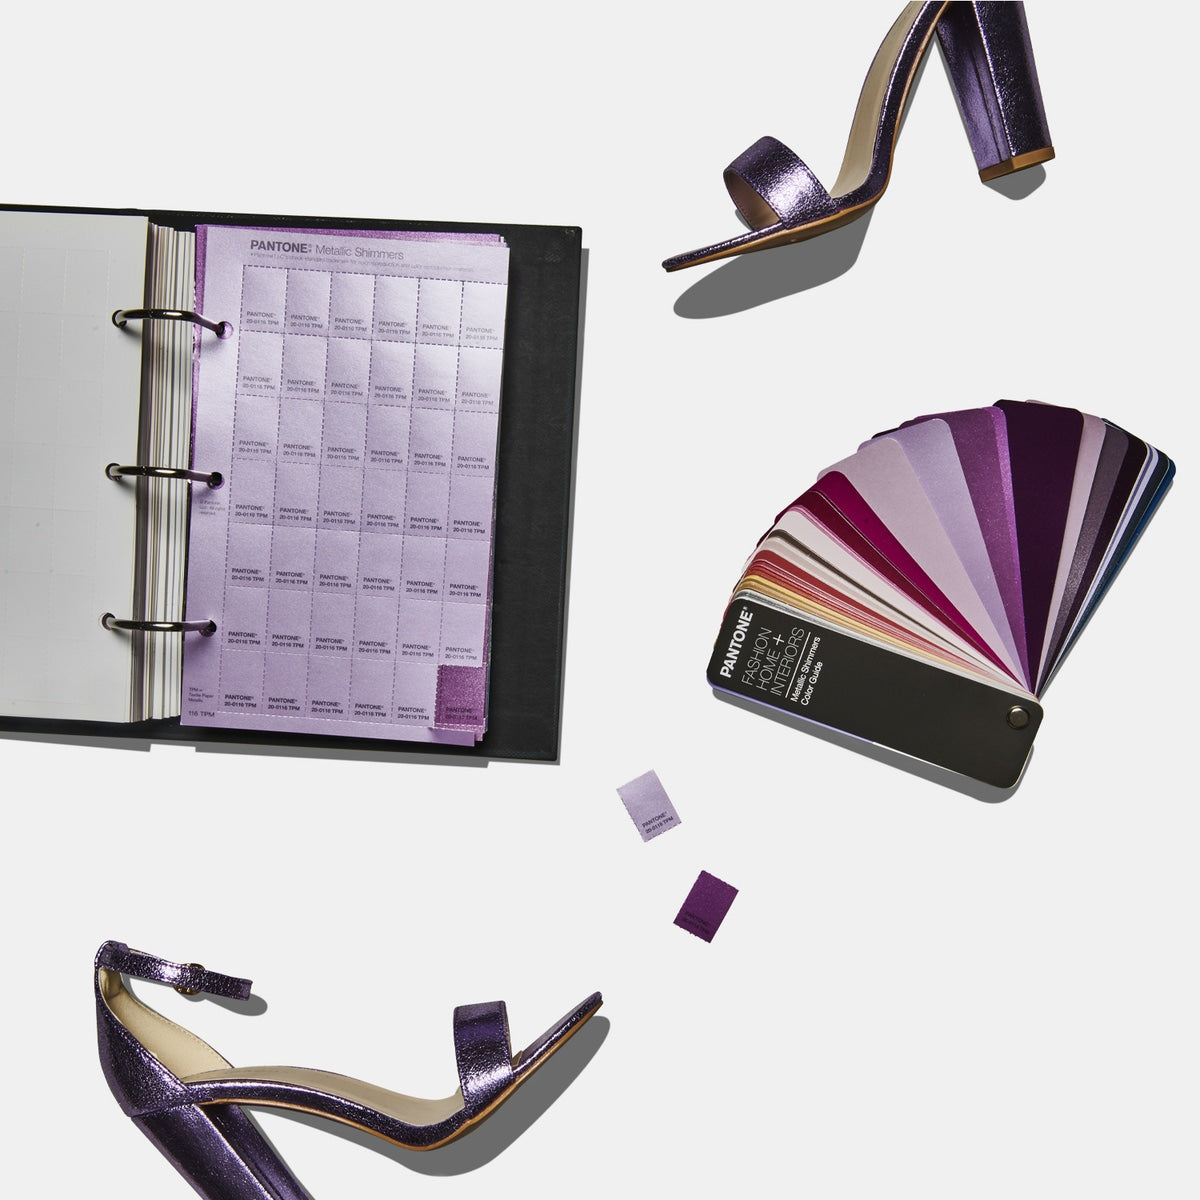 PANTONE FHI METALLIC SHIMMERS COLOR SPECIFIER AND GUIDE SET